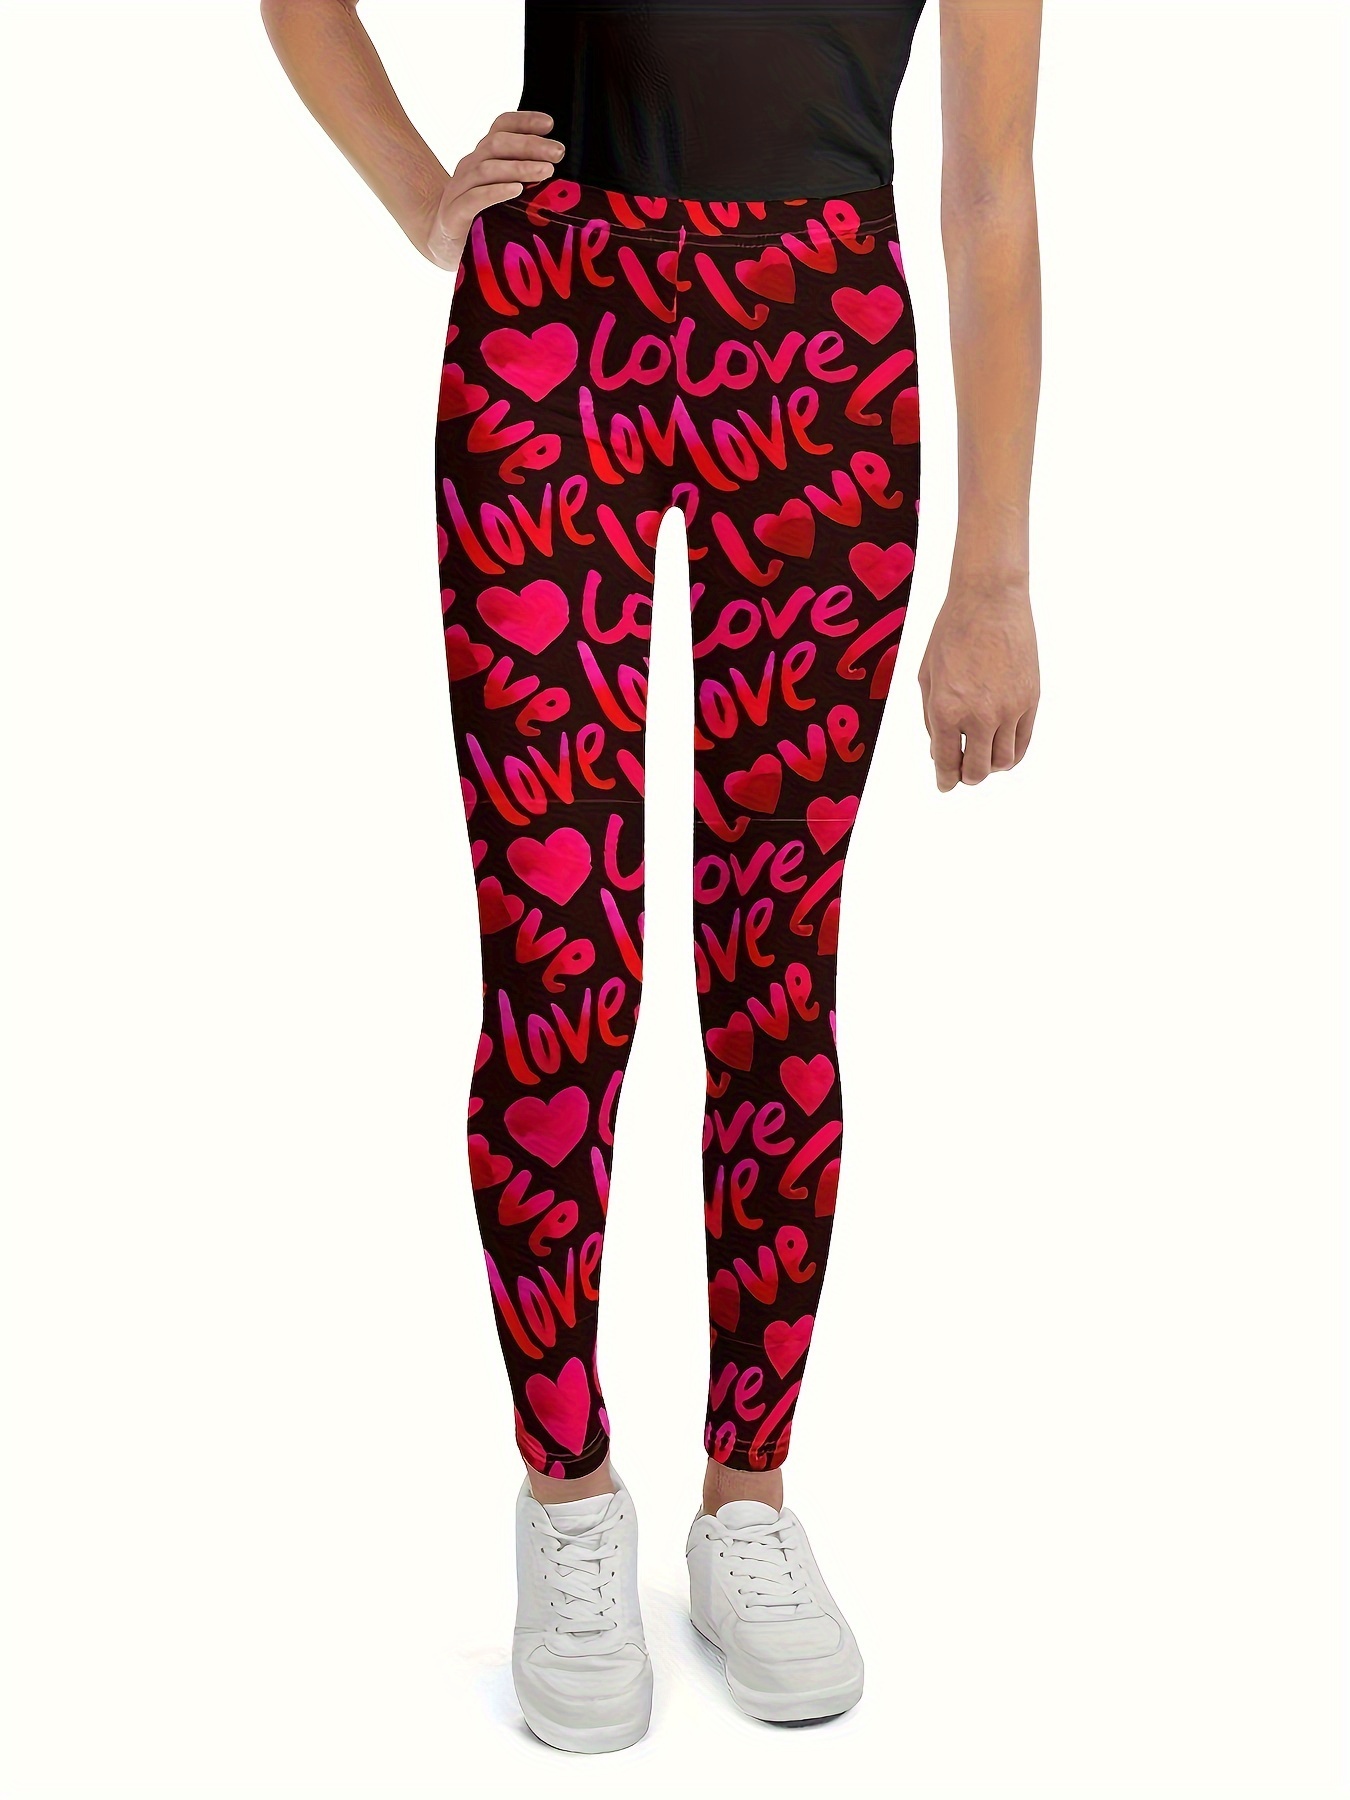 Girls Red & White Heart Love Leggings Valentines Day Knit Stretch Pants